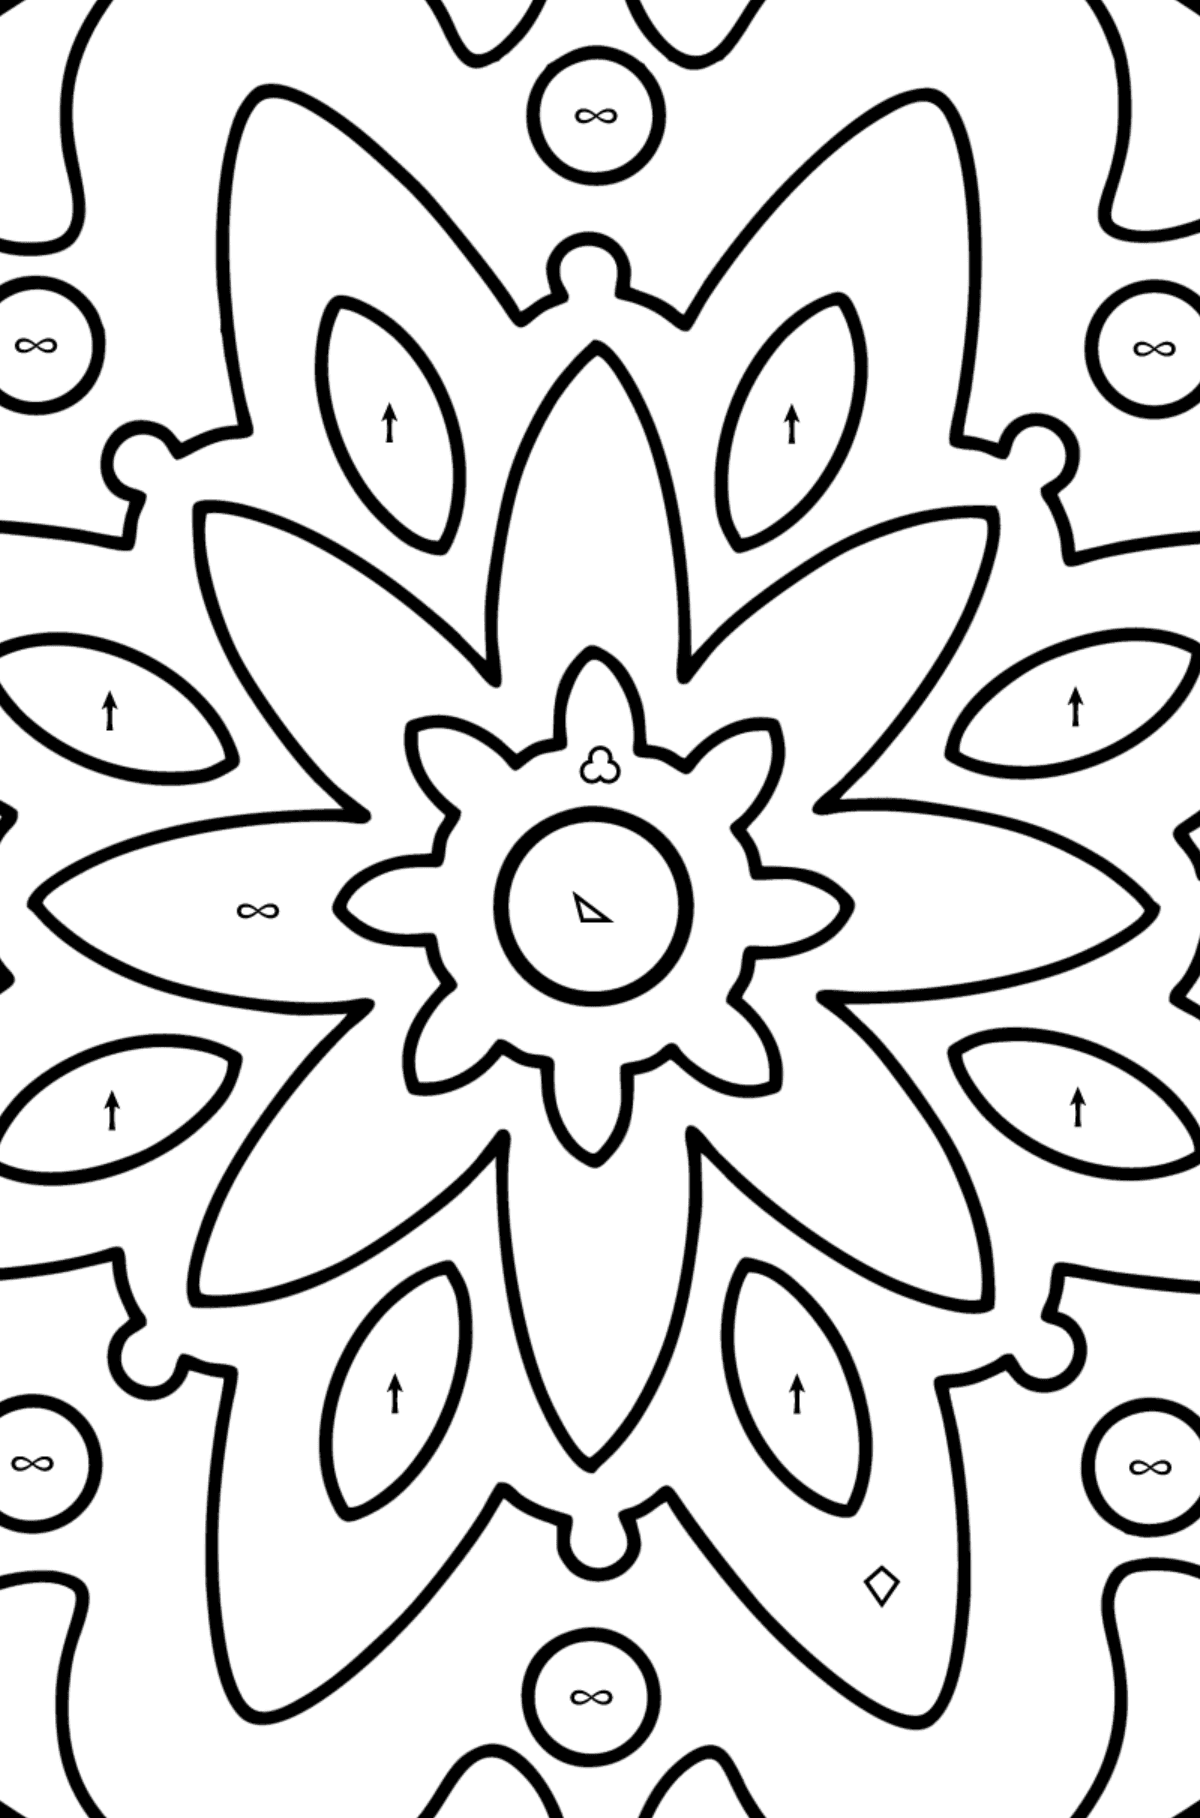 Mandala coloring page - 22 elements - Coloring by Symbols and Geometric Shapes for Kids